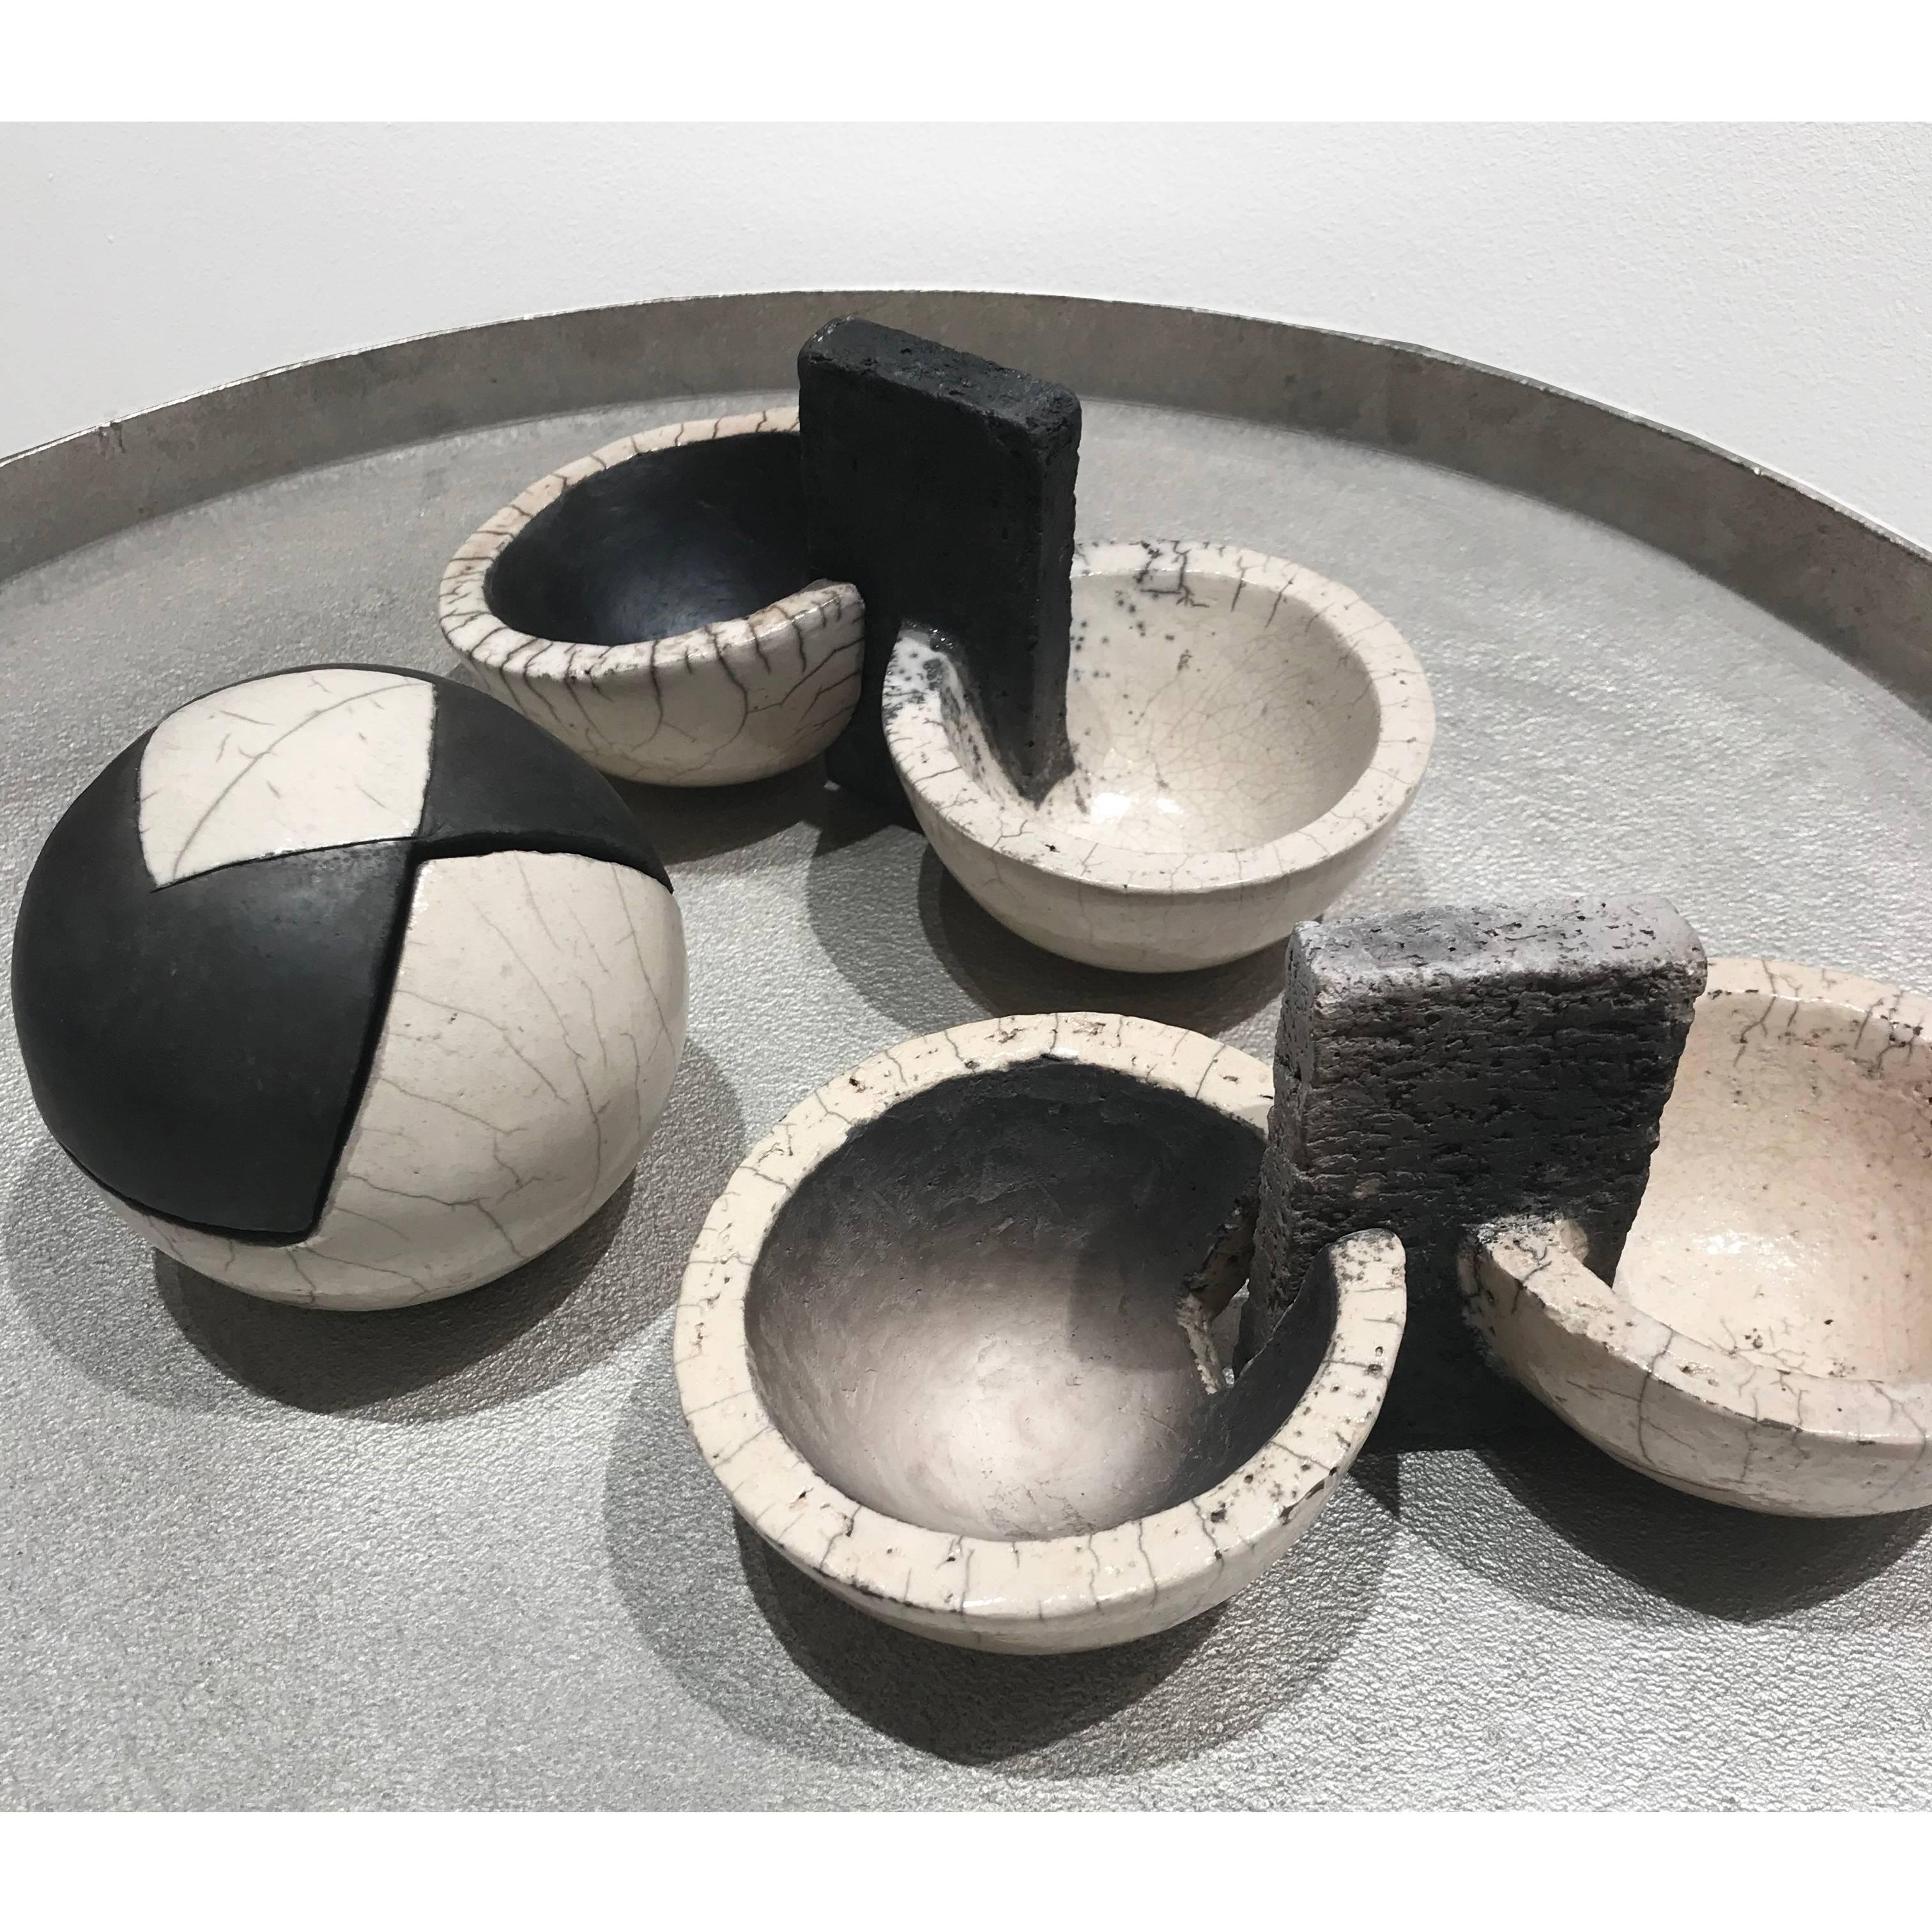 Ceramic objects which can be used as trinket boxes, coming in a range of different styles, shapes and sizes. Made in Germany. 

Bridge Bowl: W30 x D24.5 x H17.5 cm

Large Sphere: Dia15 x H15 cm

Small Sphere: Dia10 x H10 cm / W12 x D10 x H10